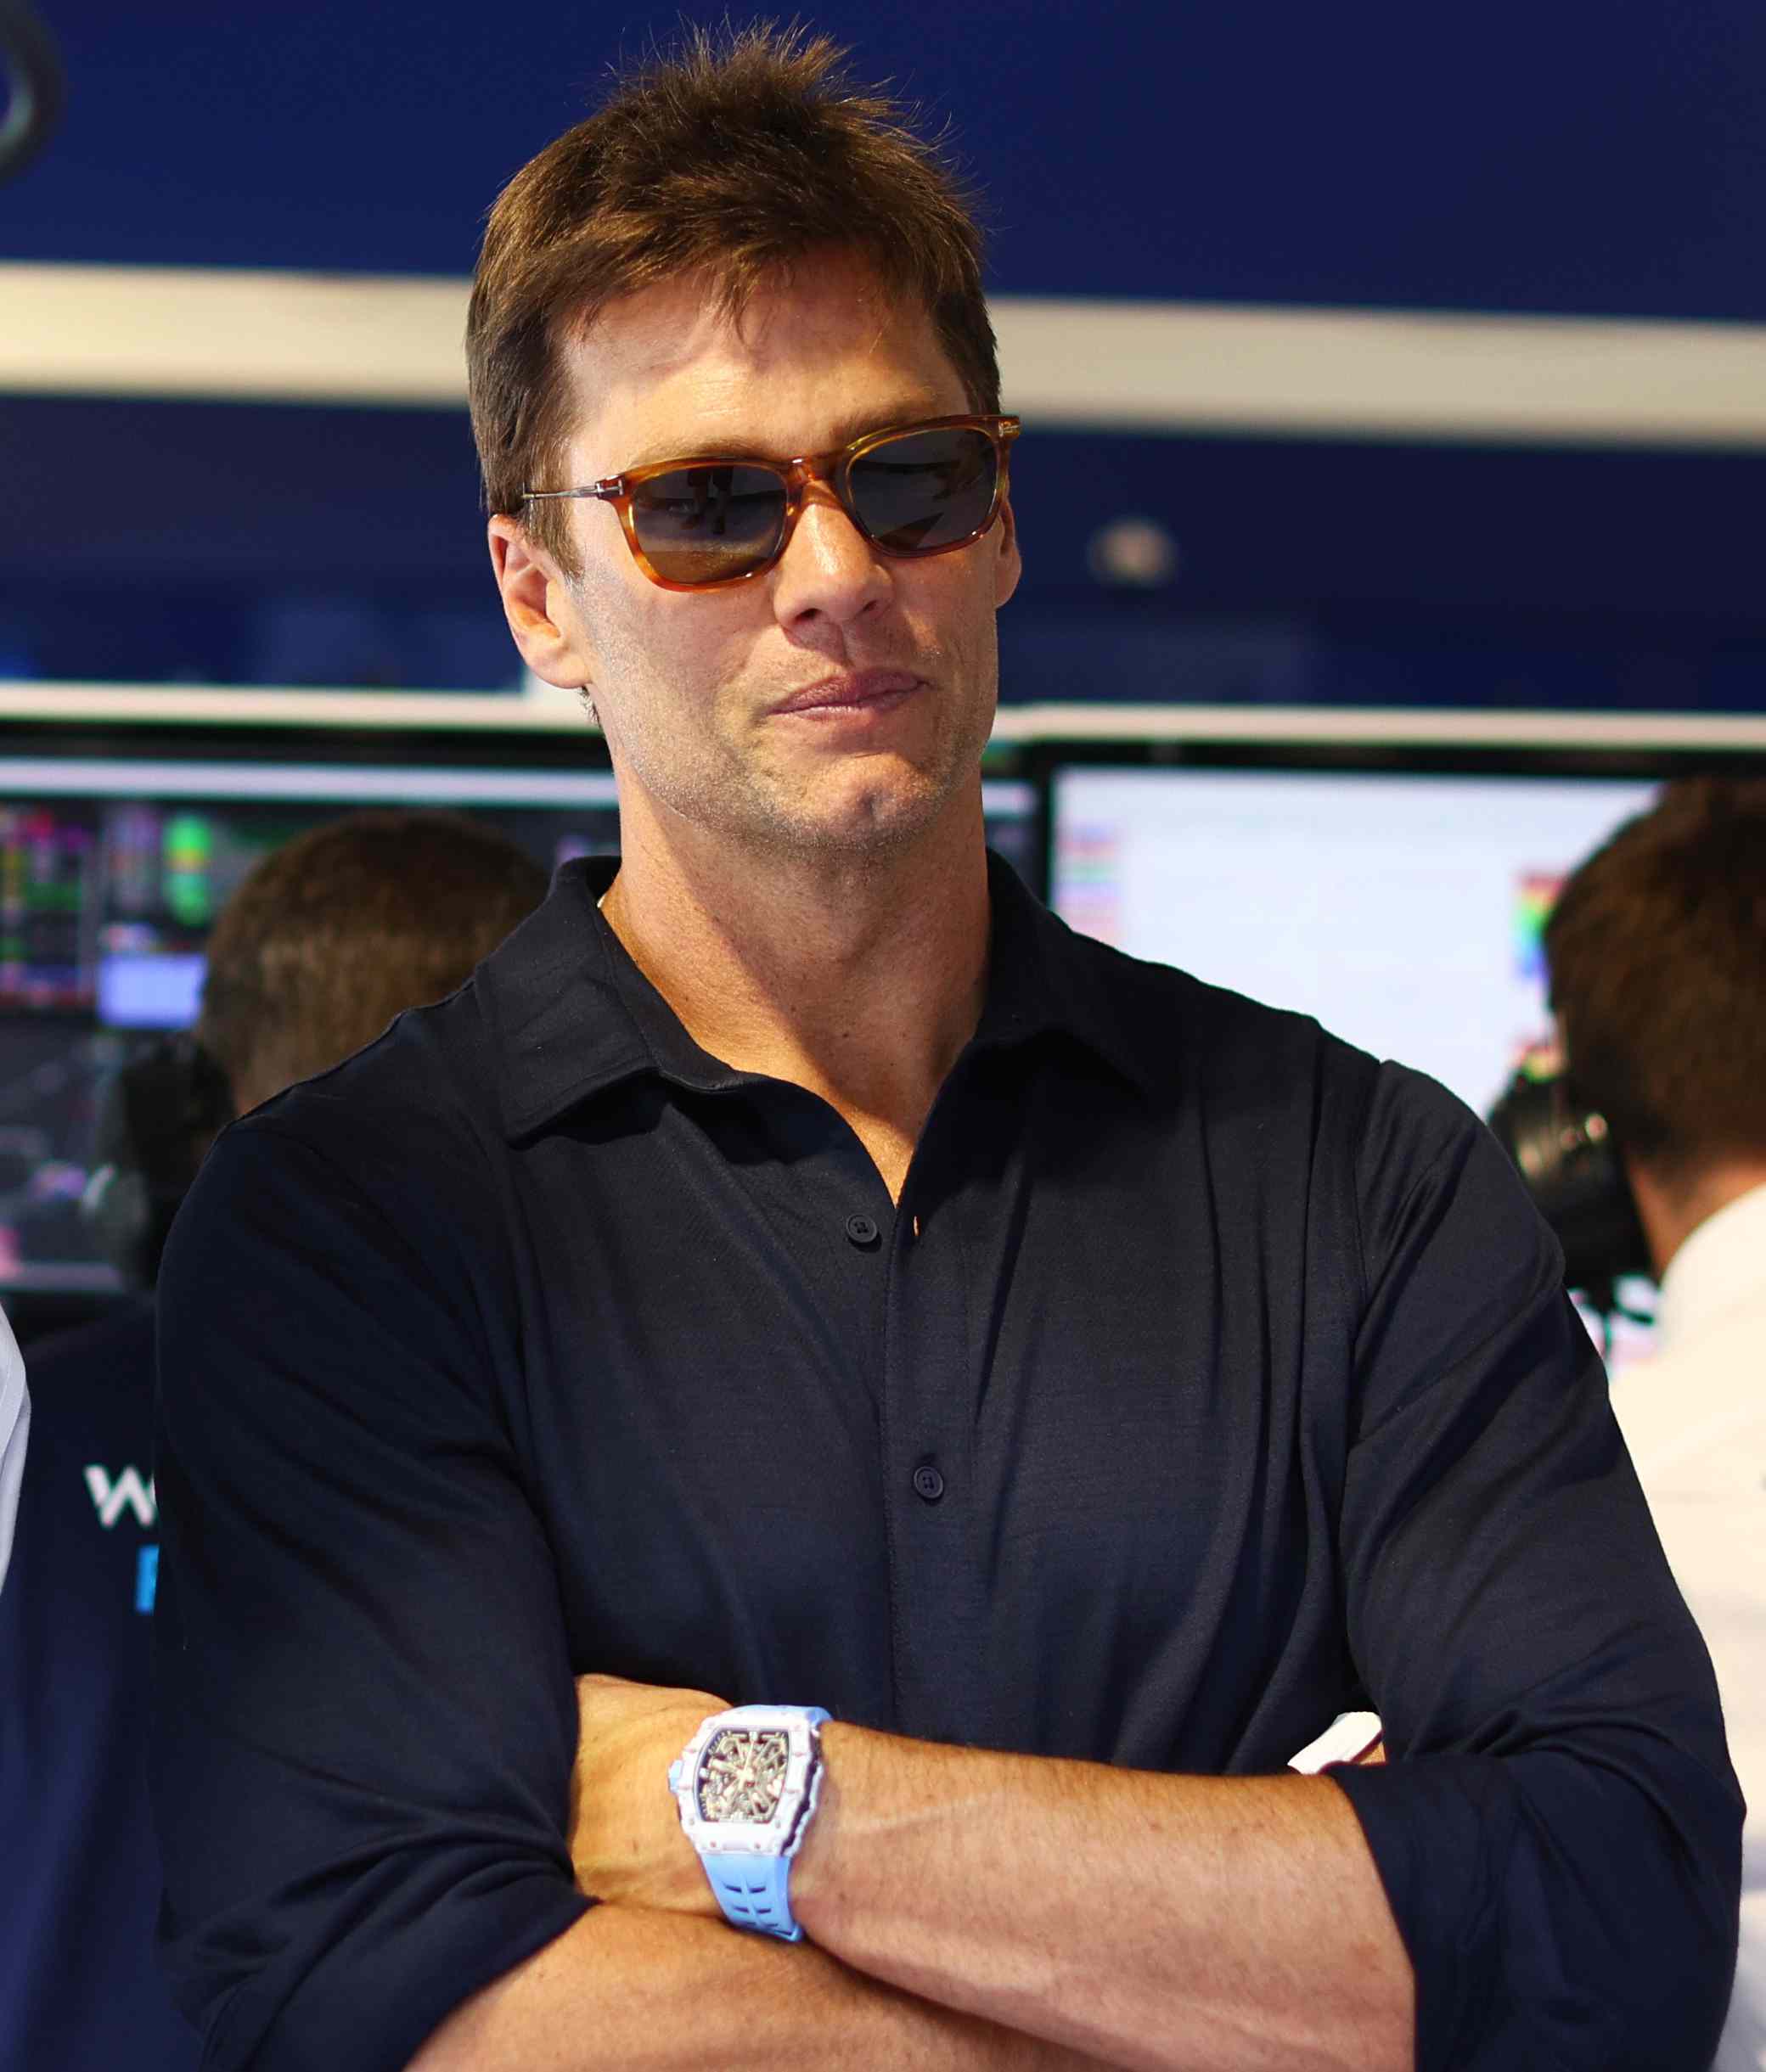 Tom Brady looks on in the Williams garage during practice ahead of the F1 Grand Prix of Miami